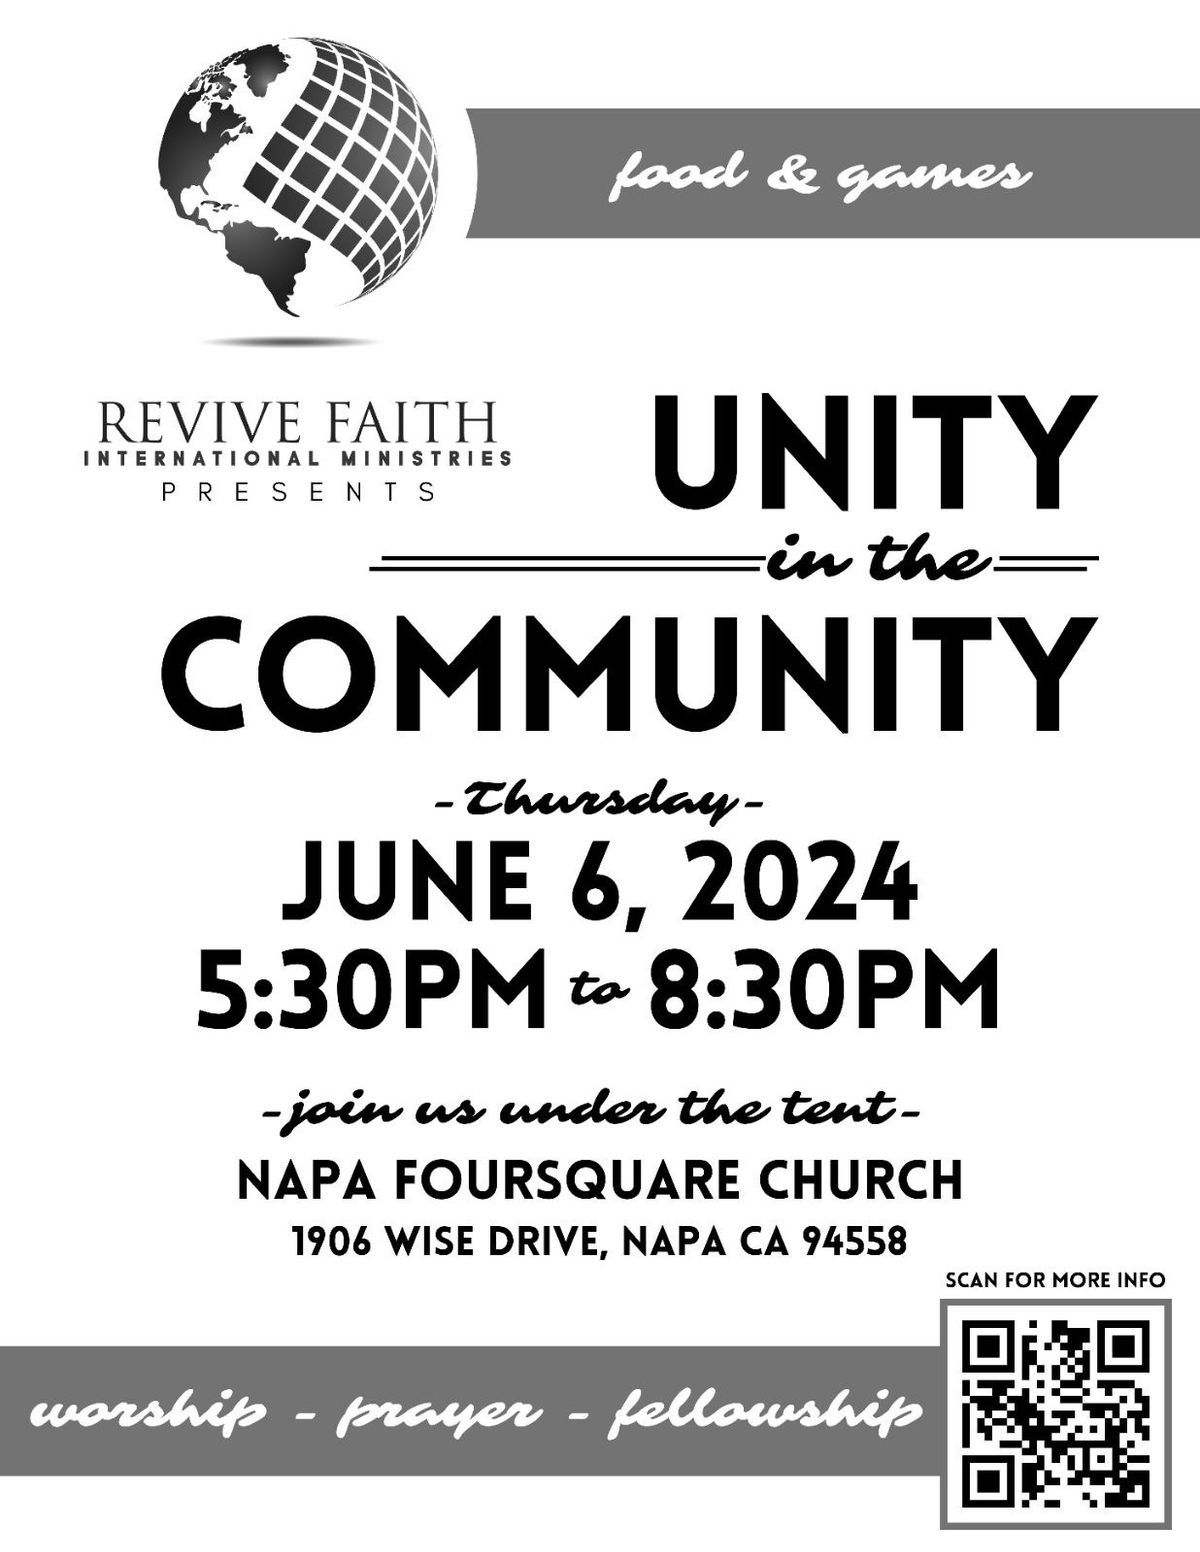 Unity in the Community 